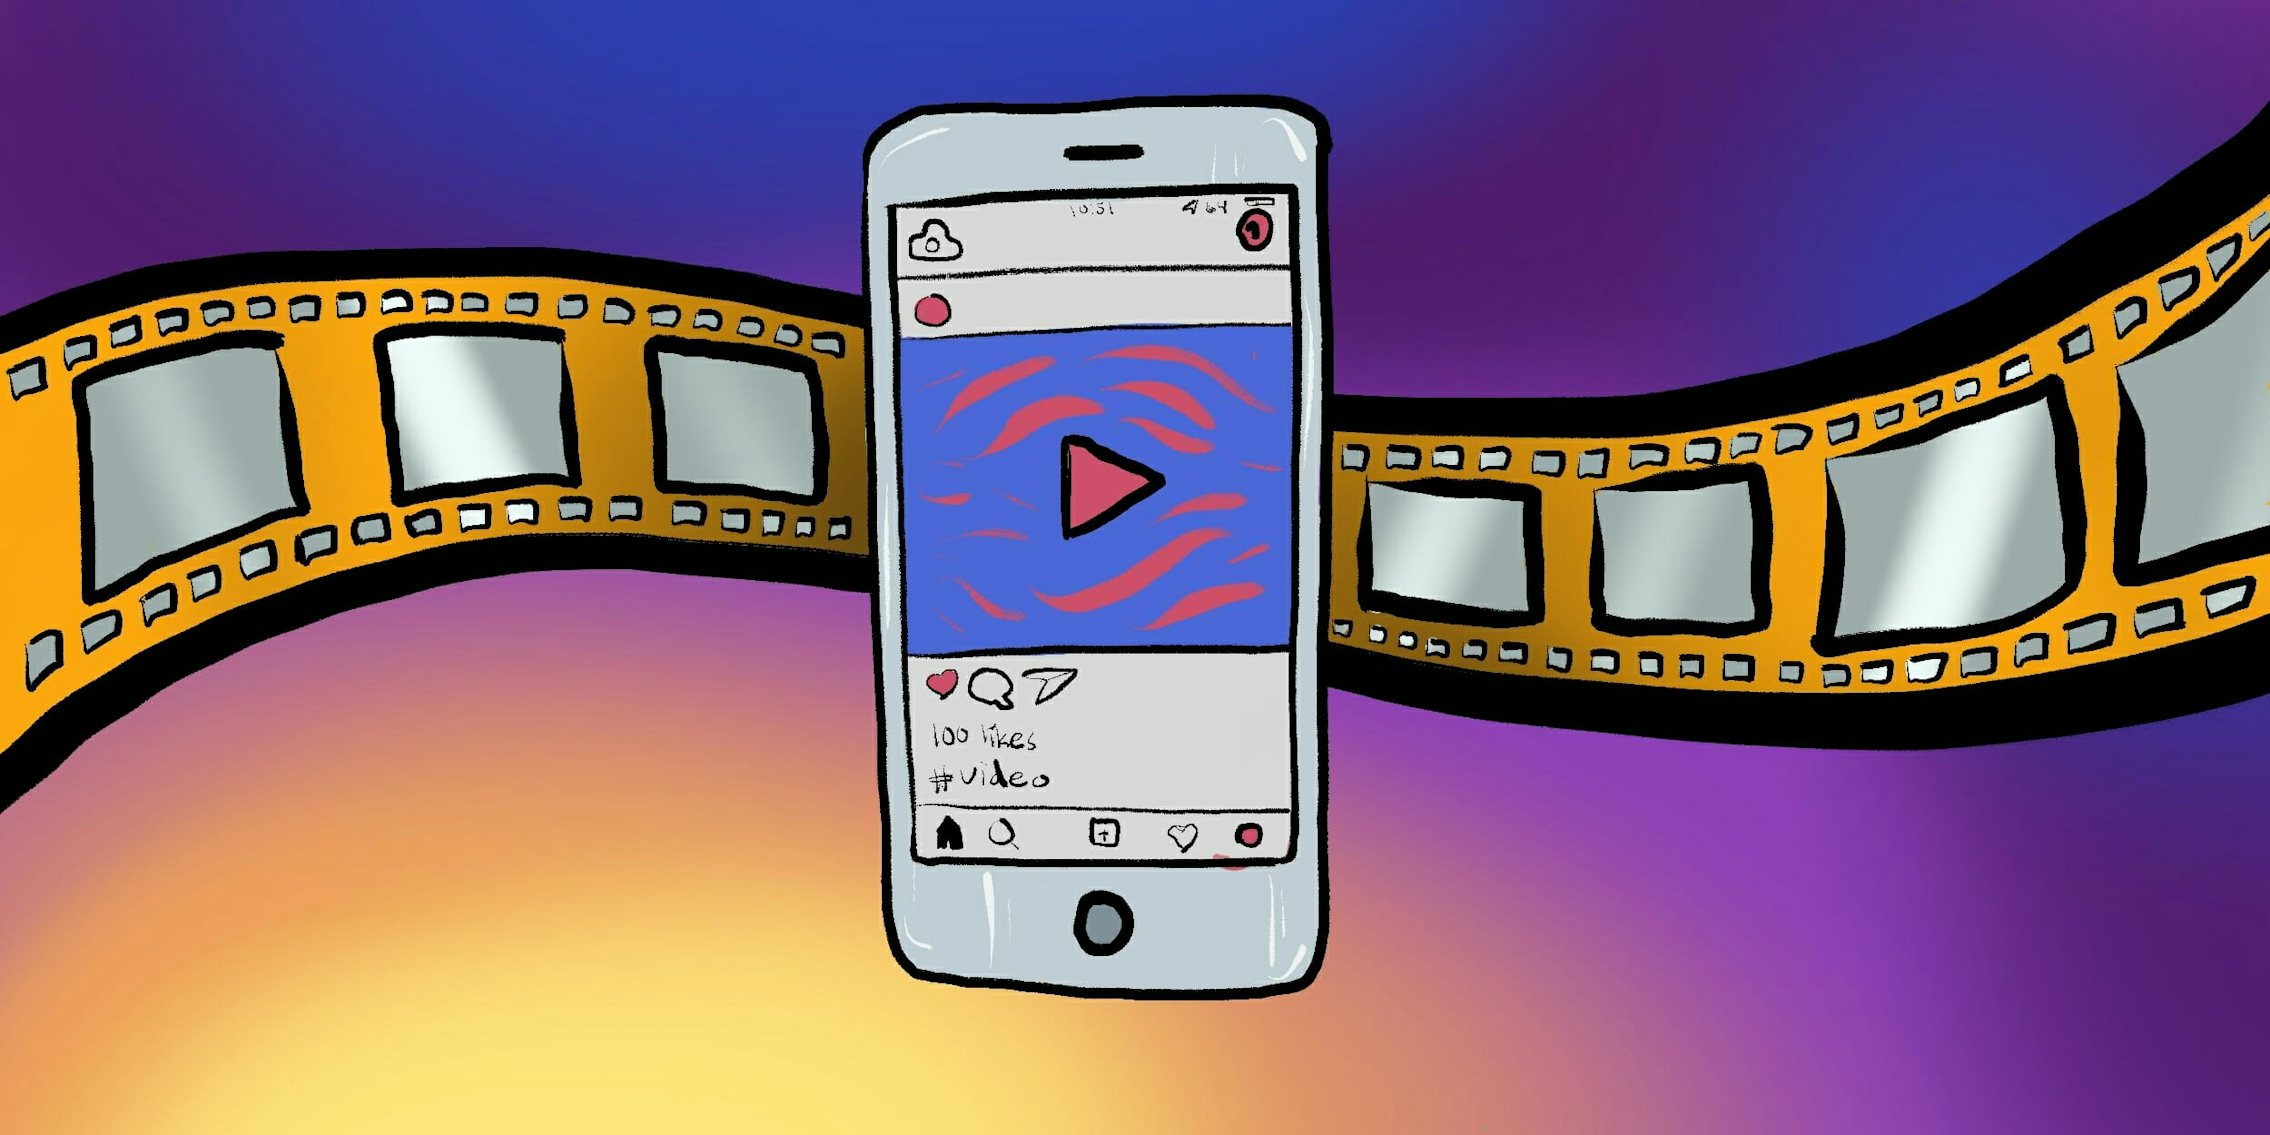 Instagram video: Illustration of phone with Instagram and film reel